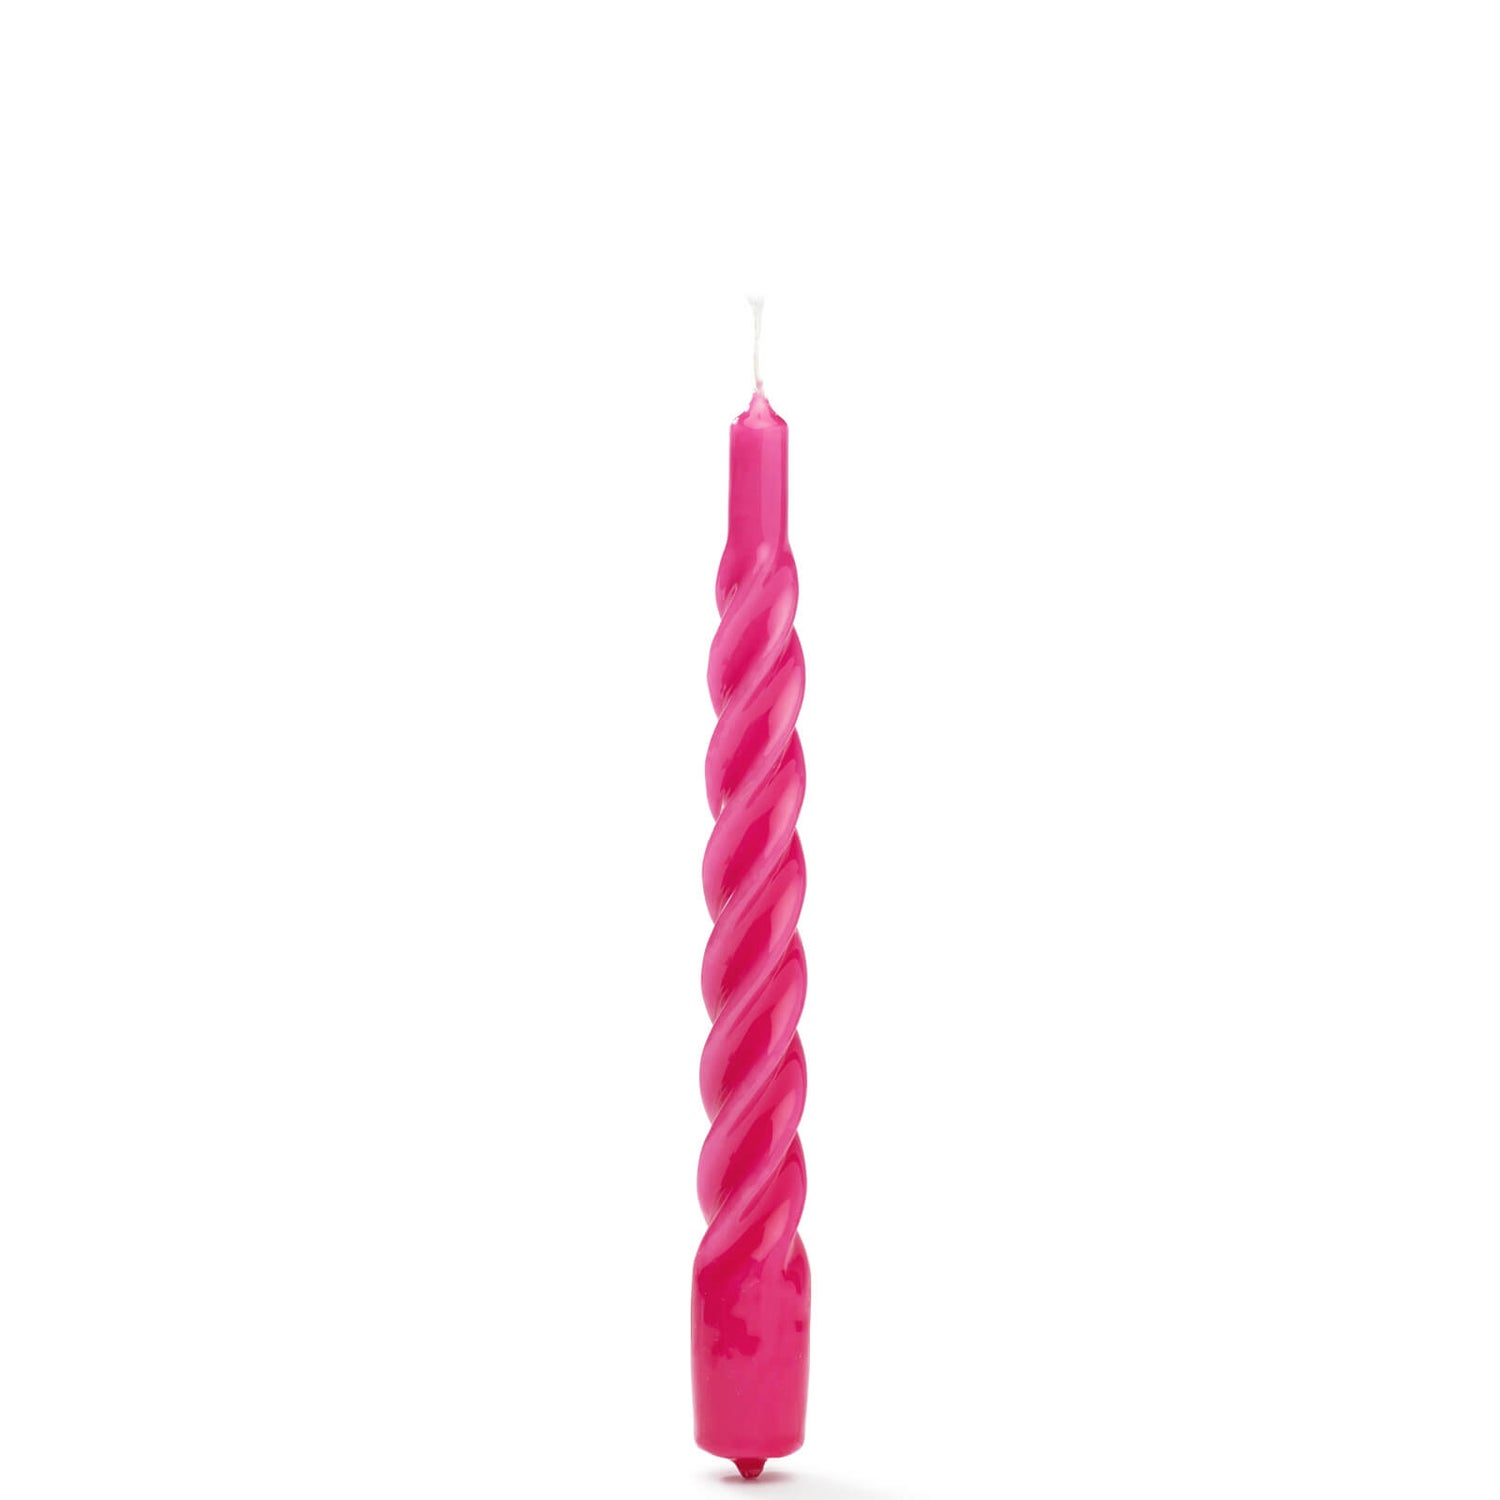 anna + nina Twisted Candle Bright Pink - Set of 6